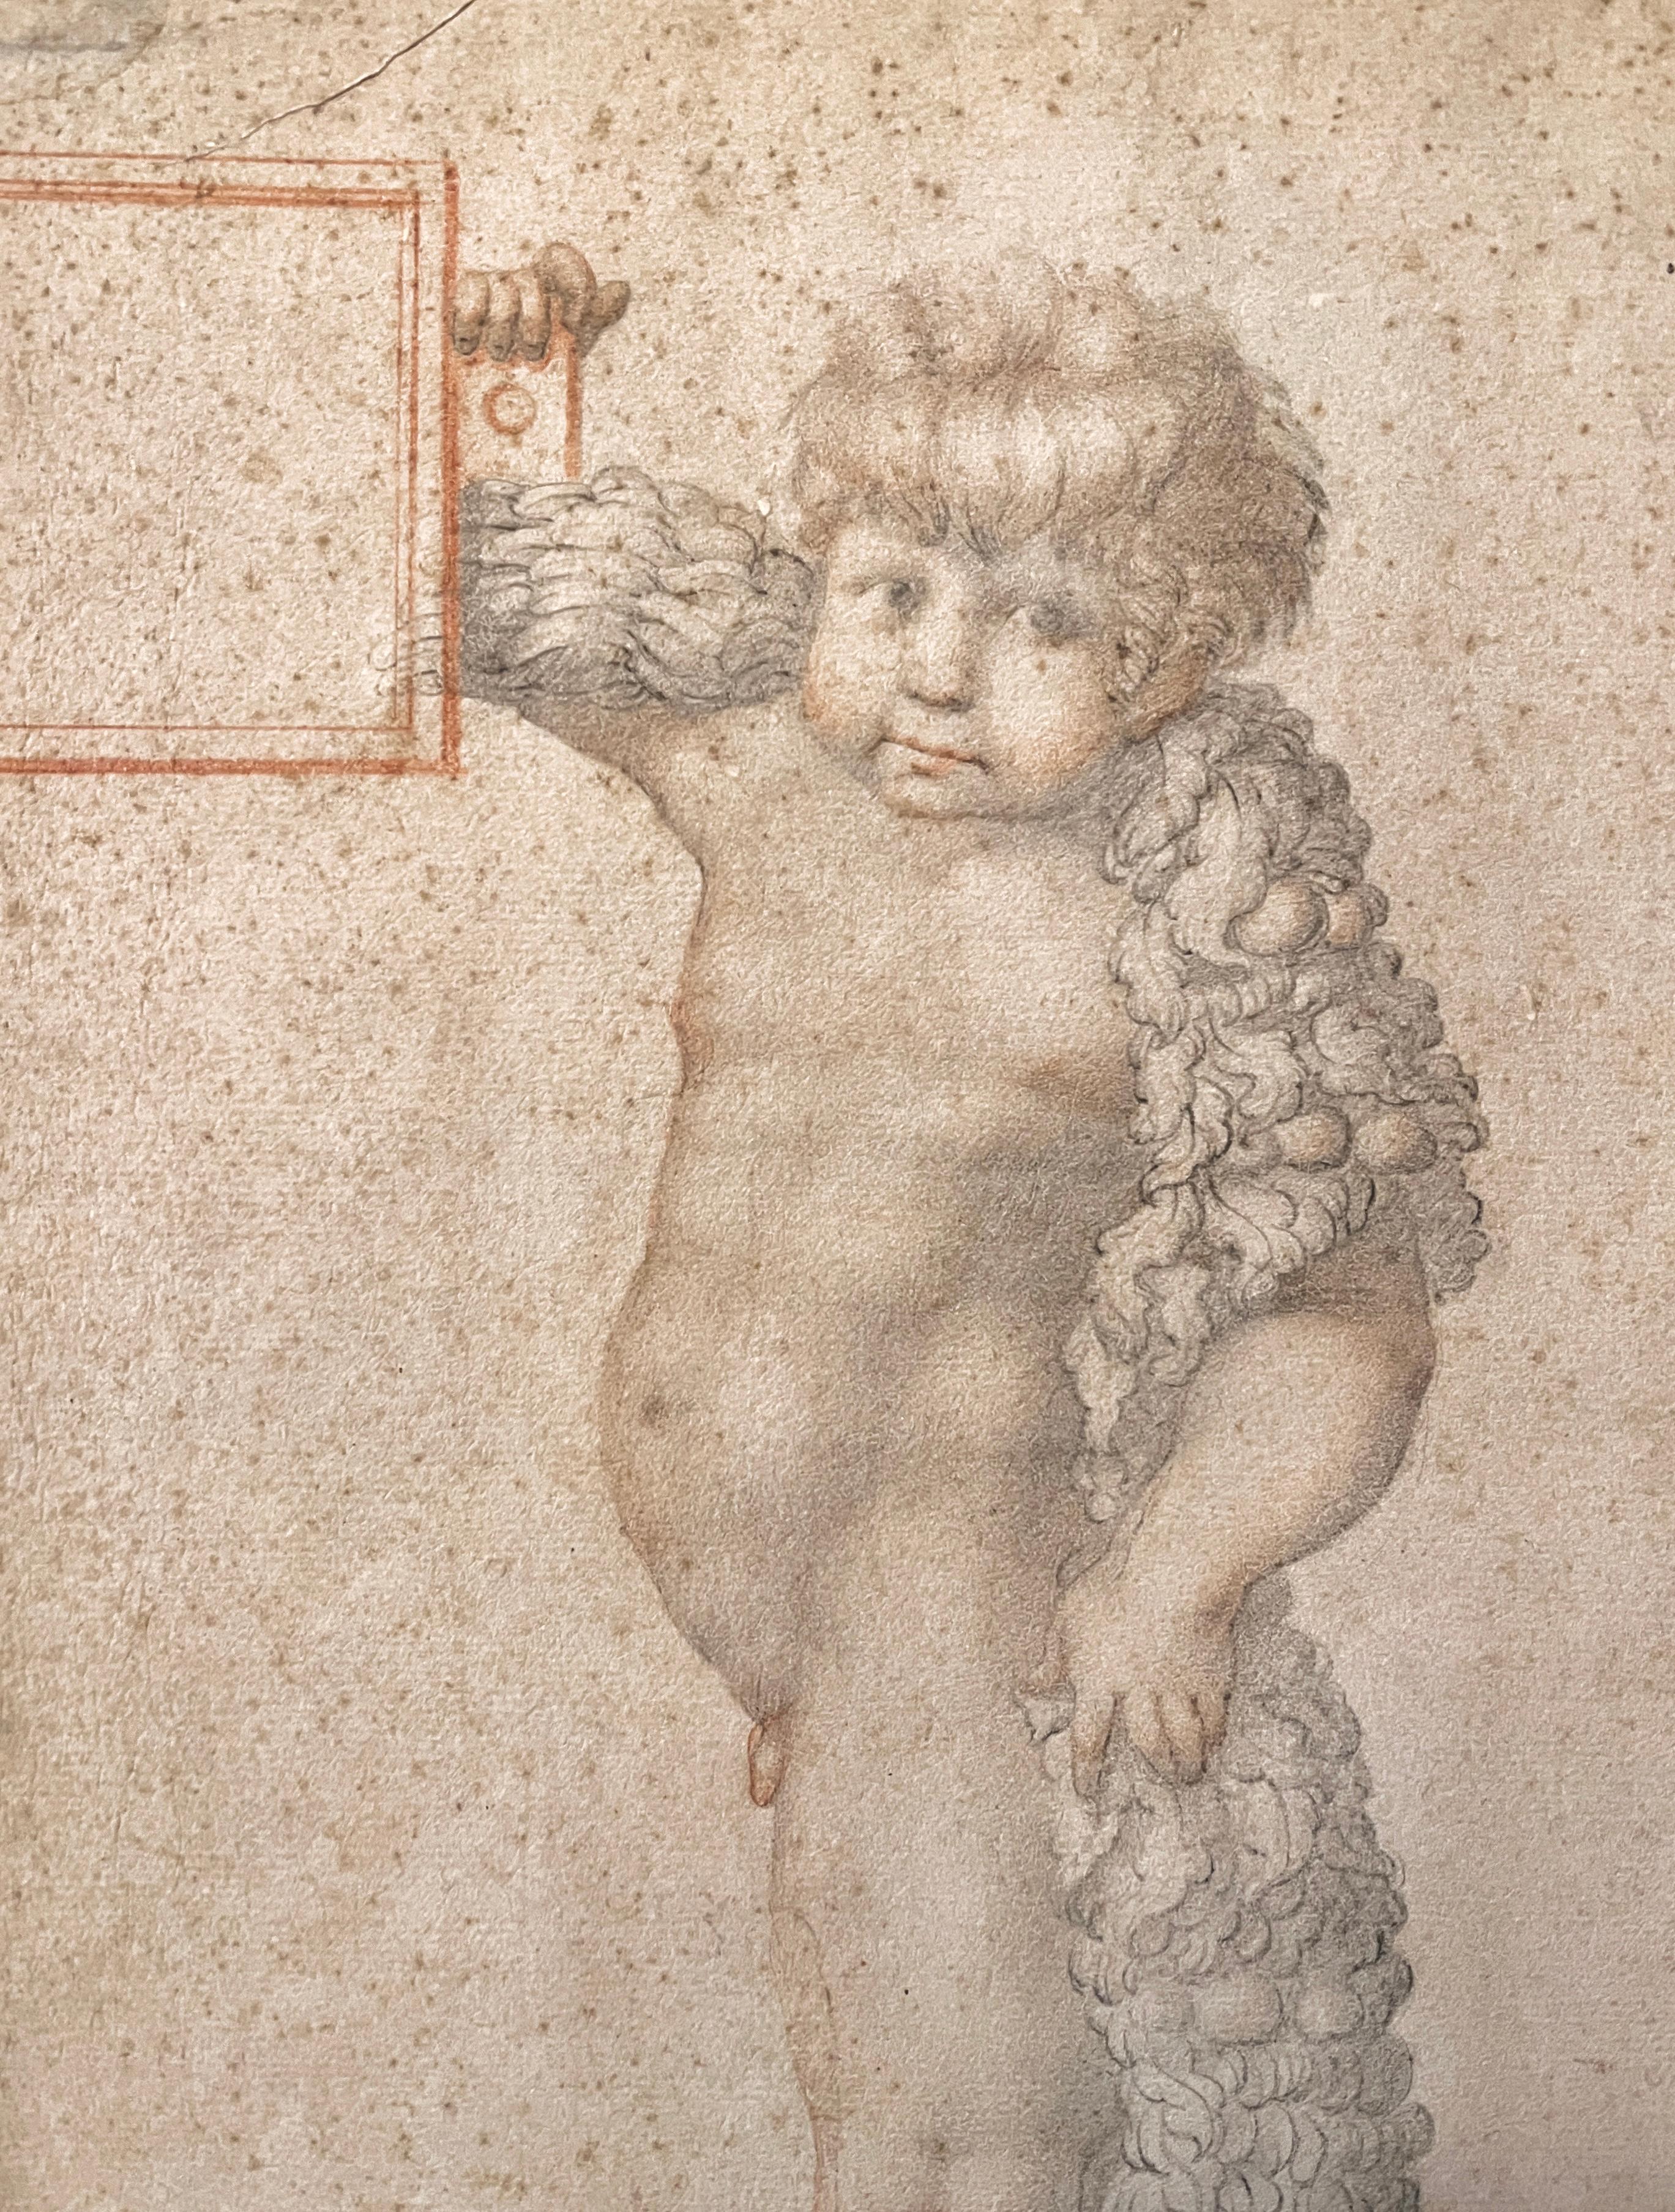 A GARLANDED PUTTO HOLDING A CARTOUCHE (After Raphael’s The Prophet Isaiah) - Art by FLORENTINE SCHOOL c.1550-1600